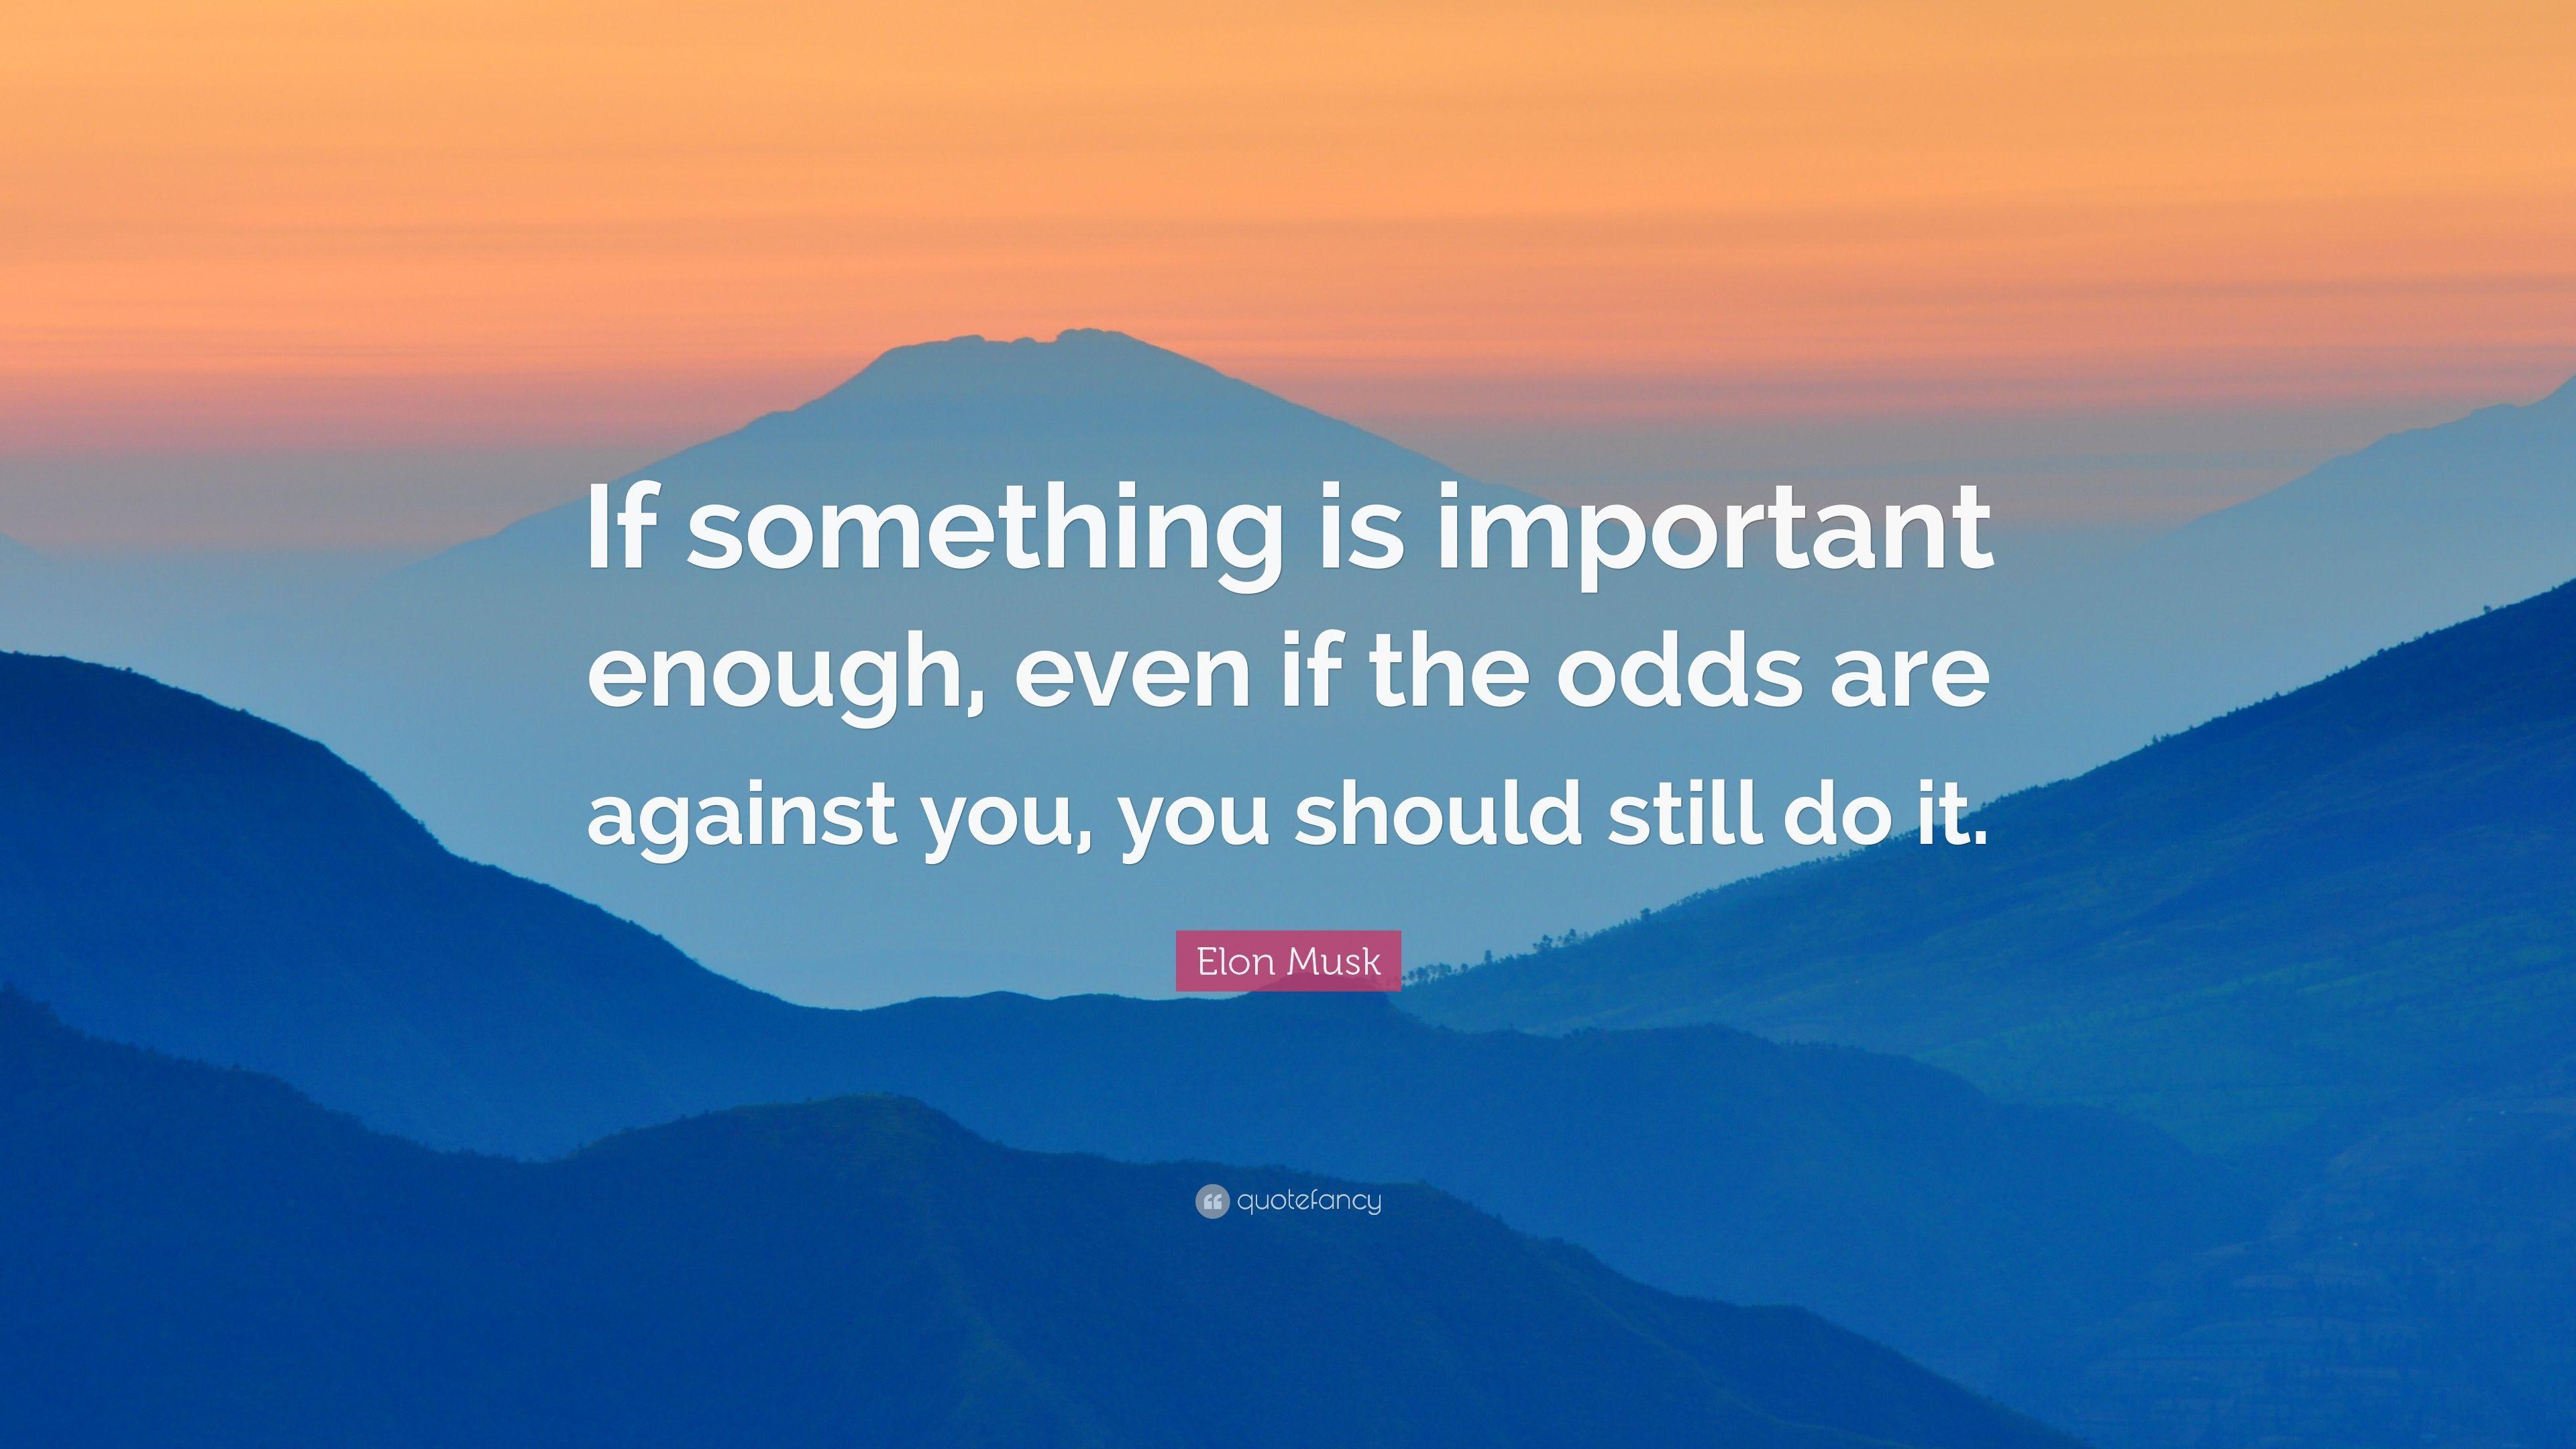 Elon Musk Quote: “If something is important enough, even if